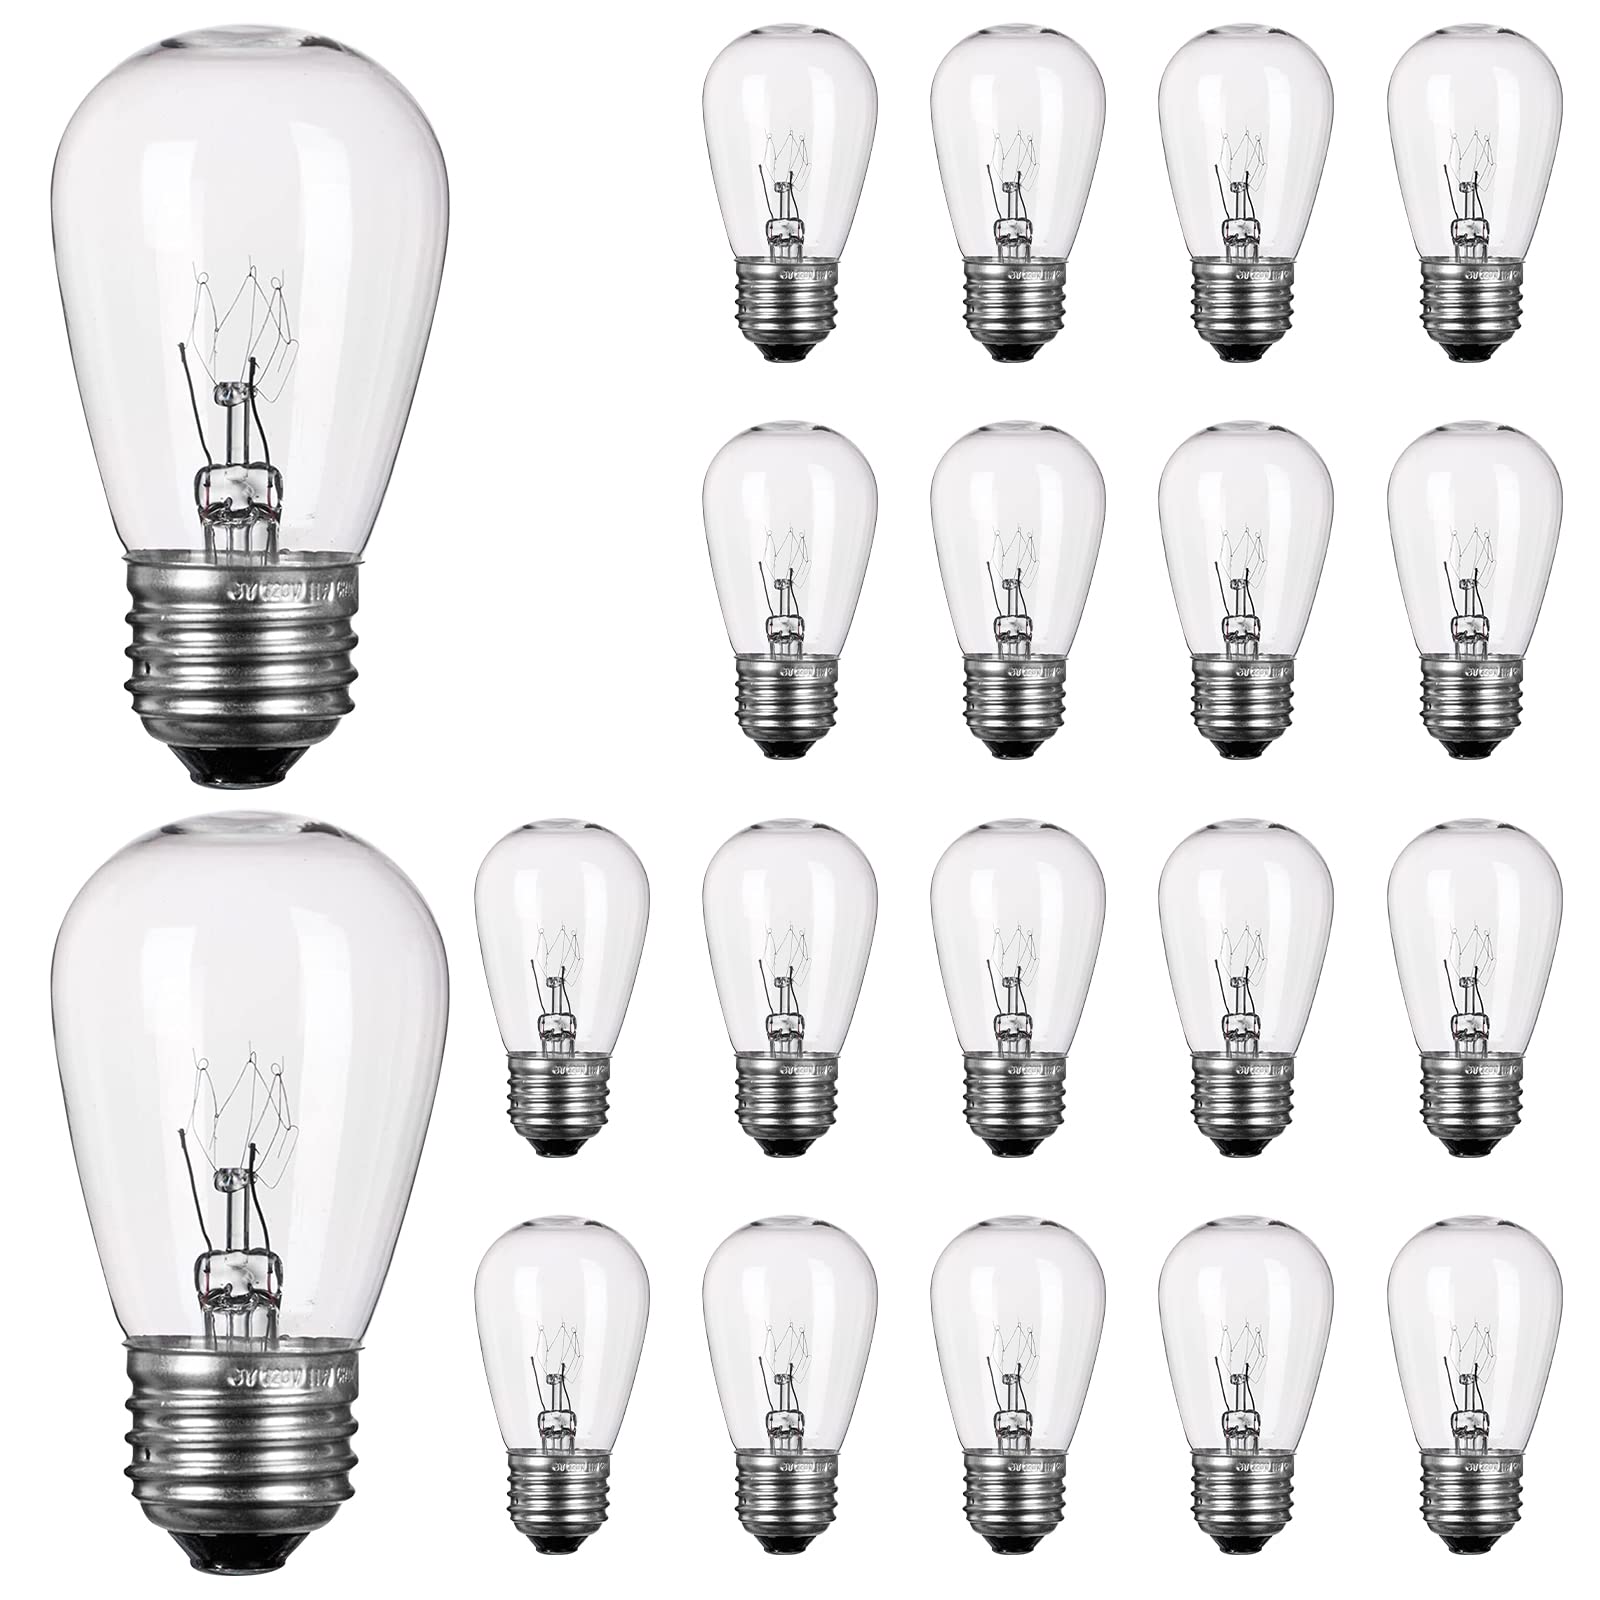 20 Count / Incandescent Bulbs / Warm White